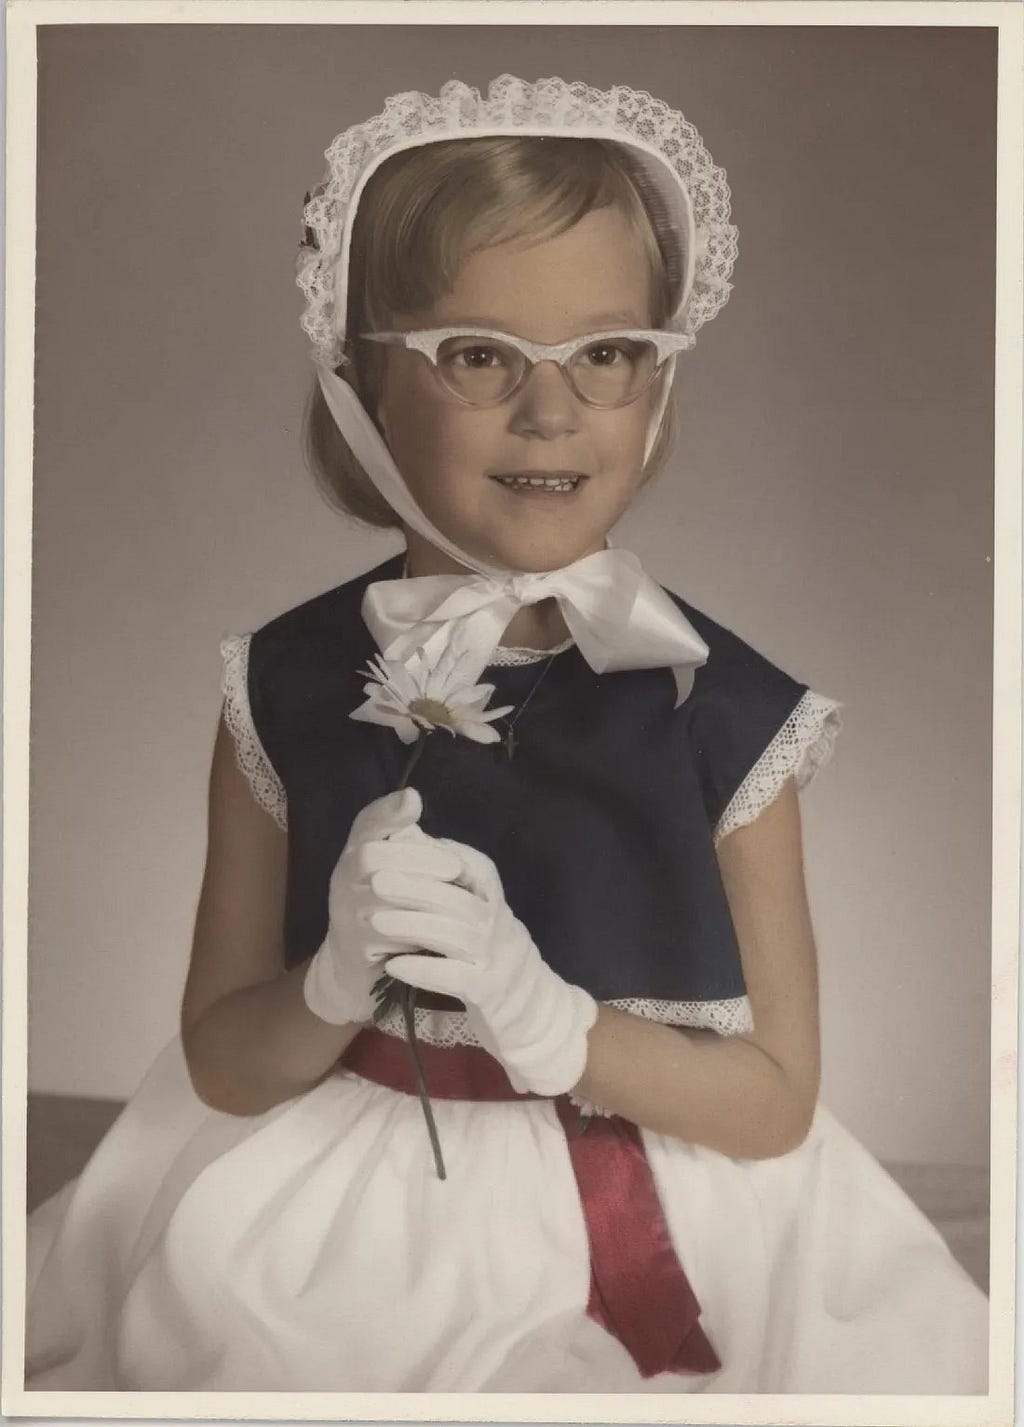 The author in her Easter best, 1964